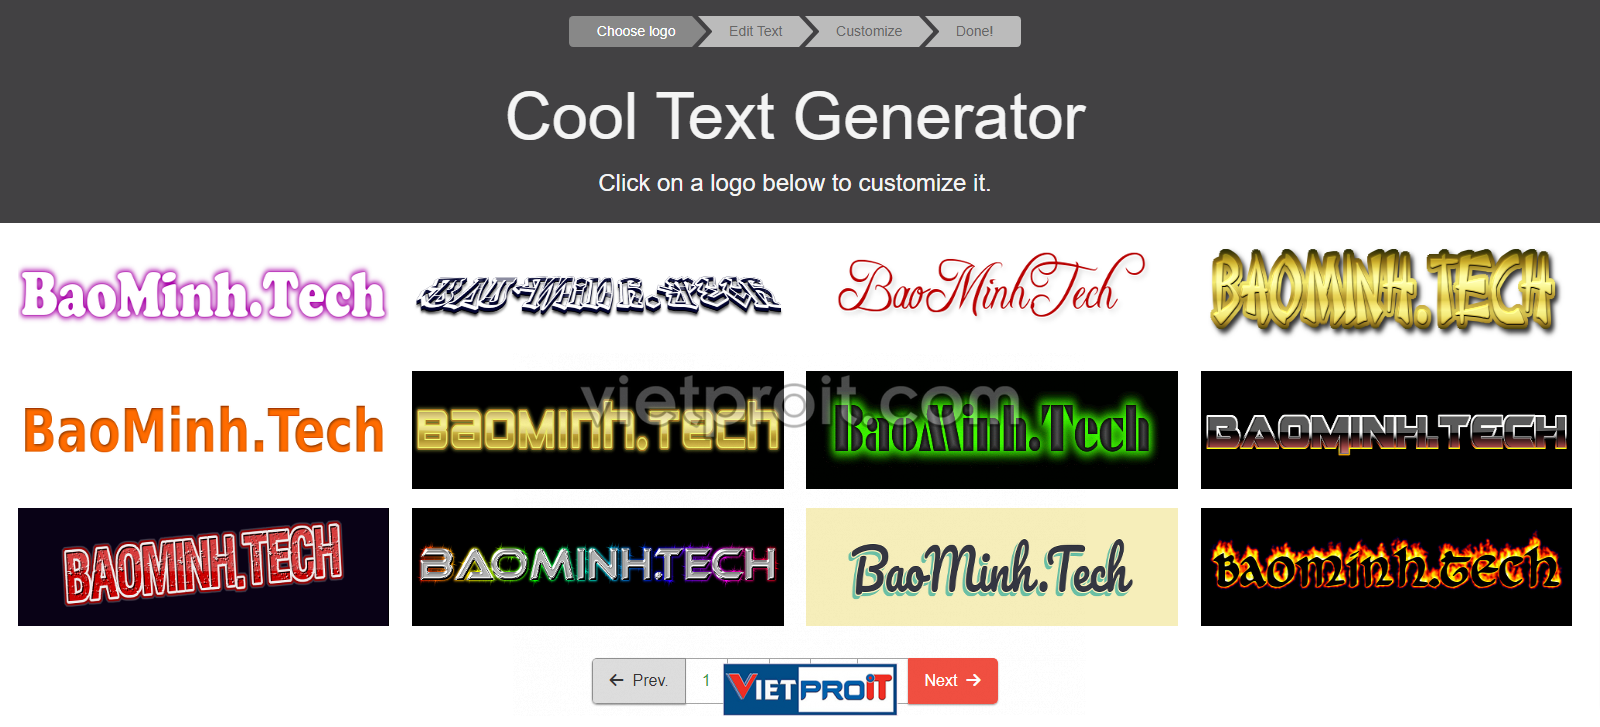 cool text generator e28495 page 2